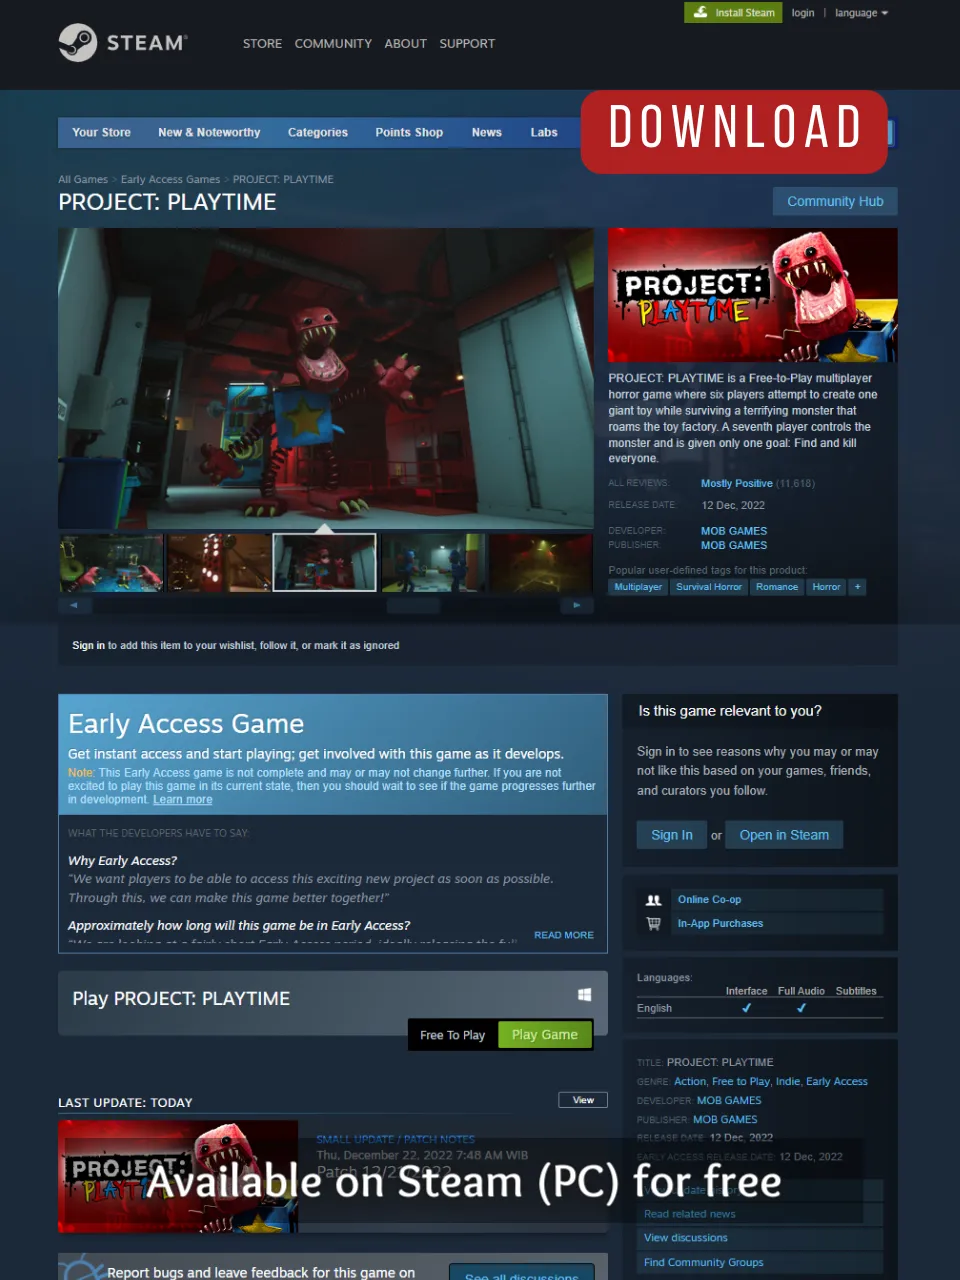 Project: Playtime Will Start Early Access on Steam on December 6th